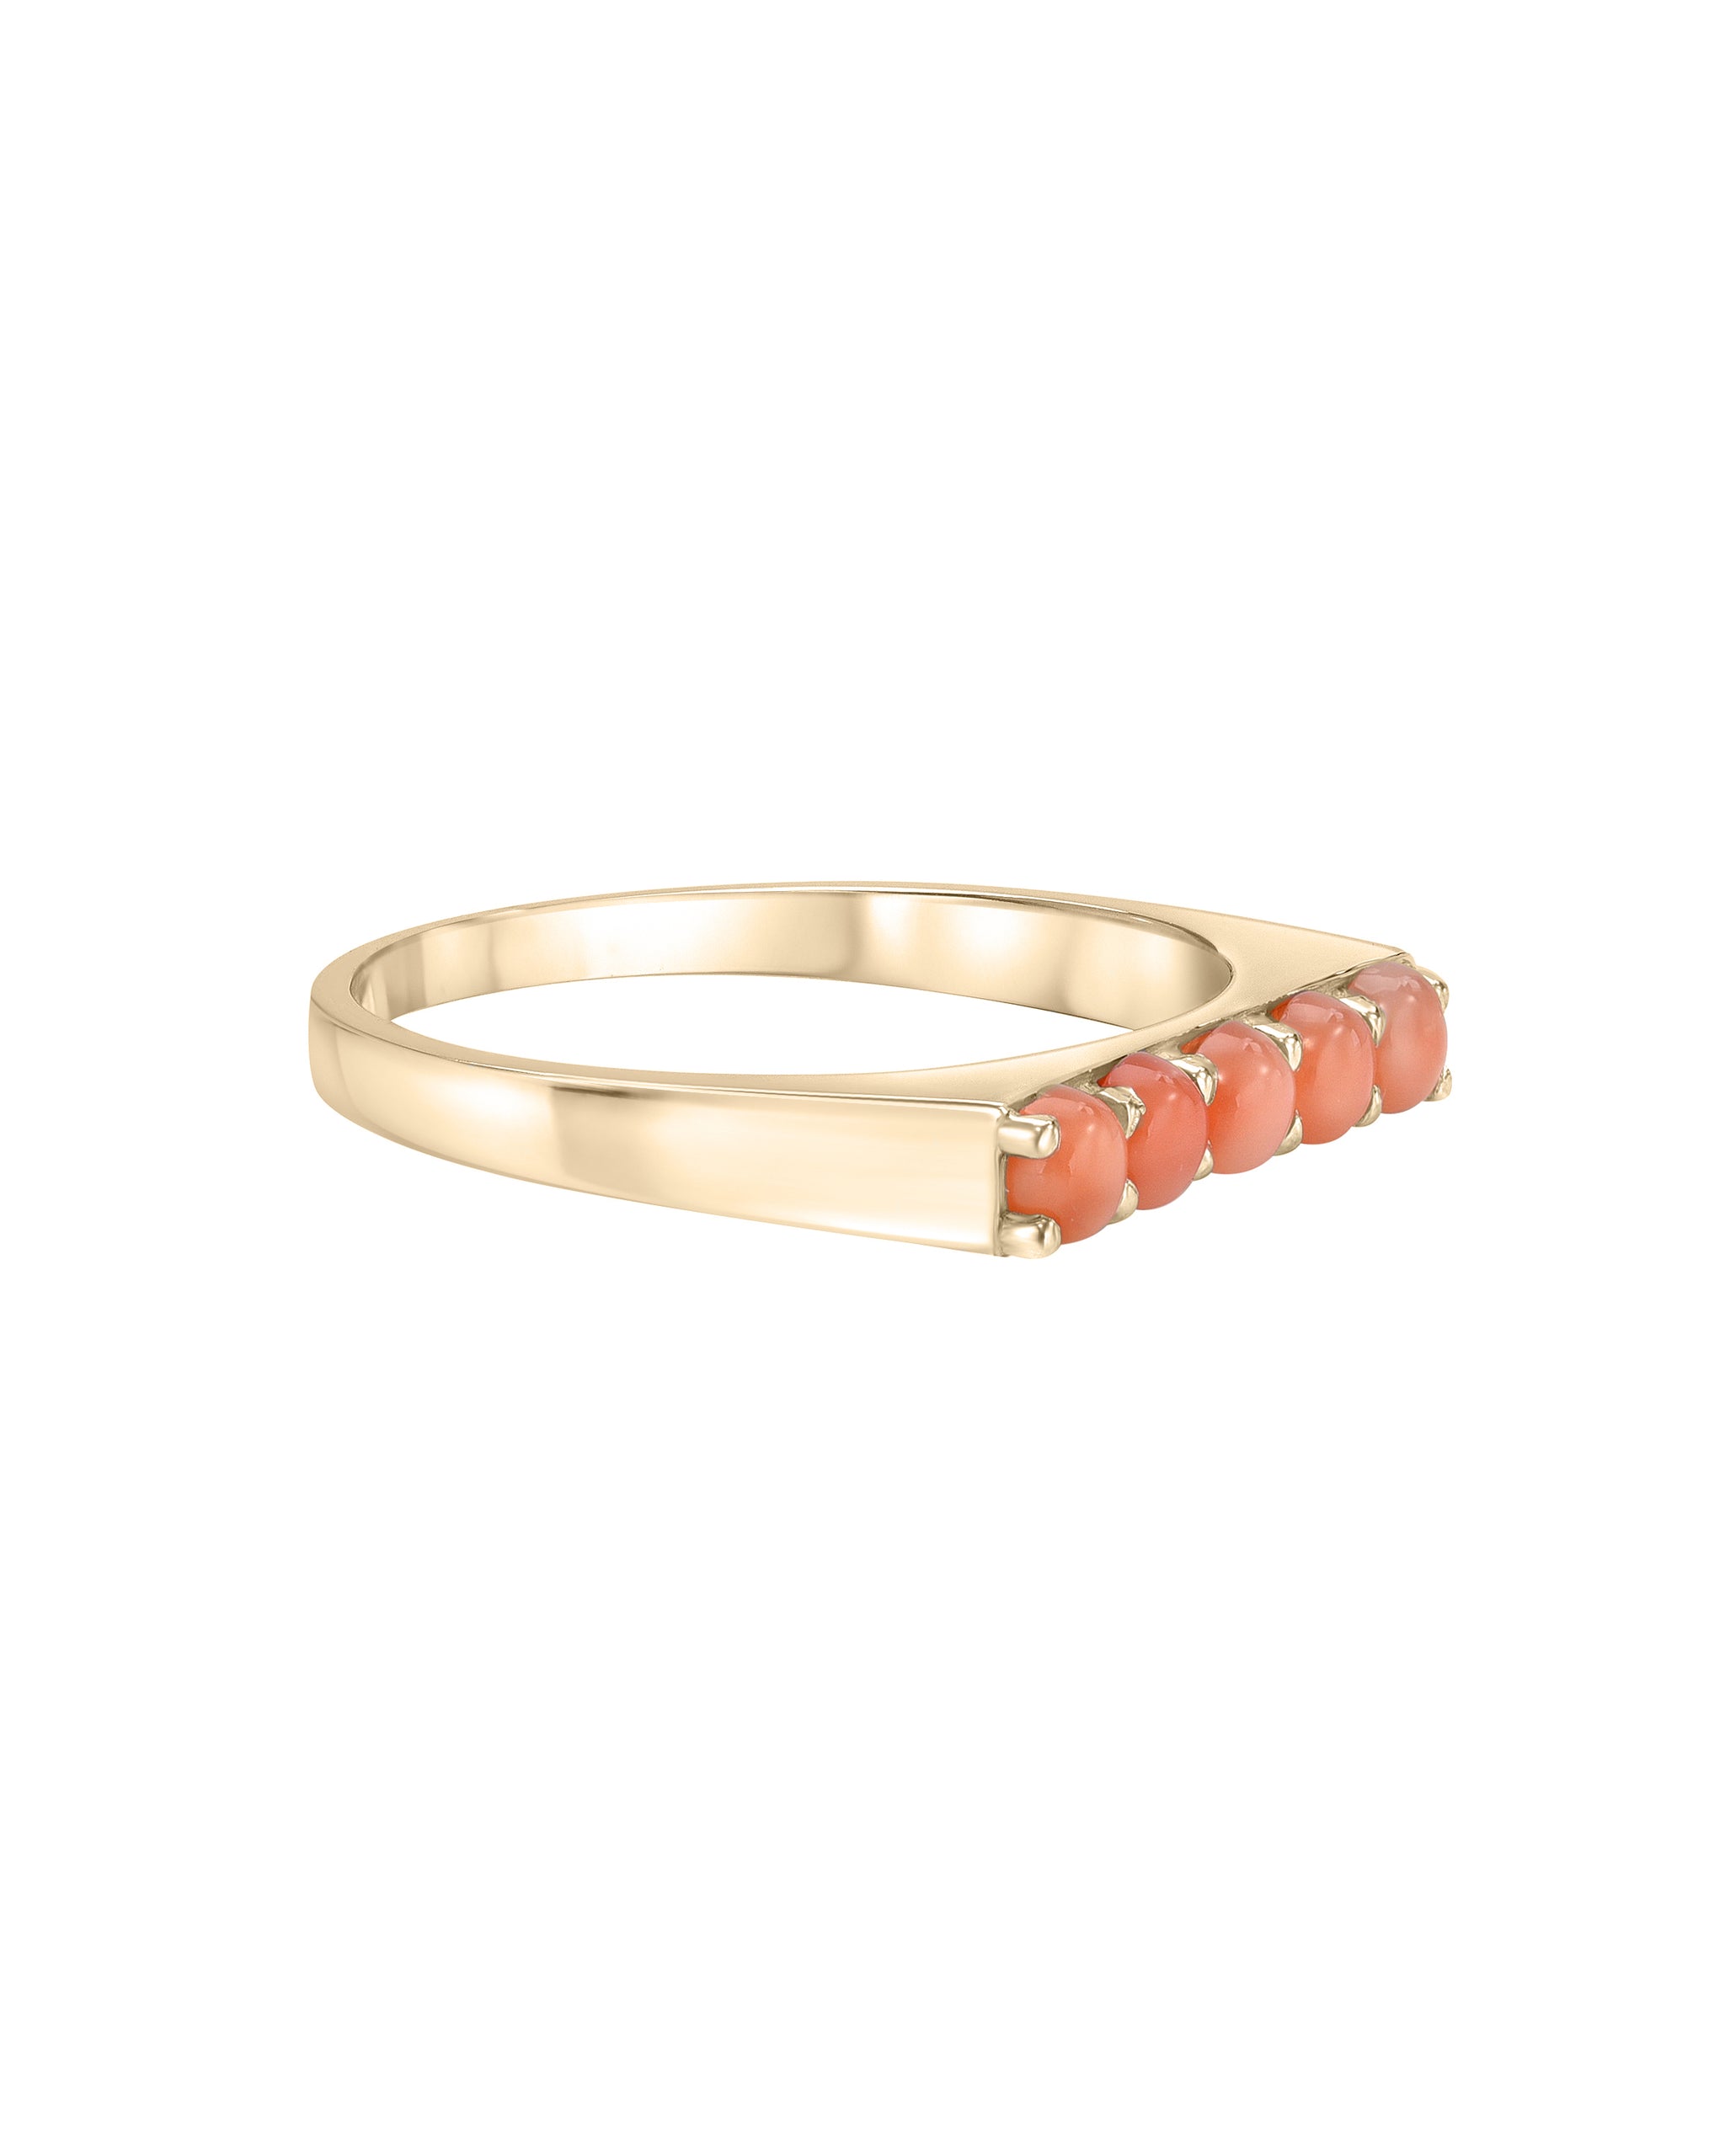 River Signet Ring, 14k Gold Ring with 3mm Coral Stones, Handmade in Los Angeles California by Turquoise and Tobacco